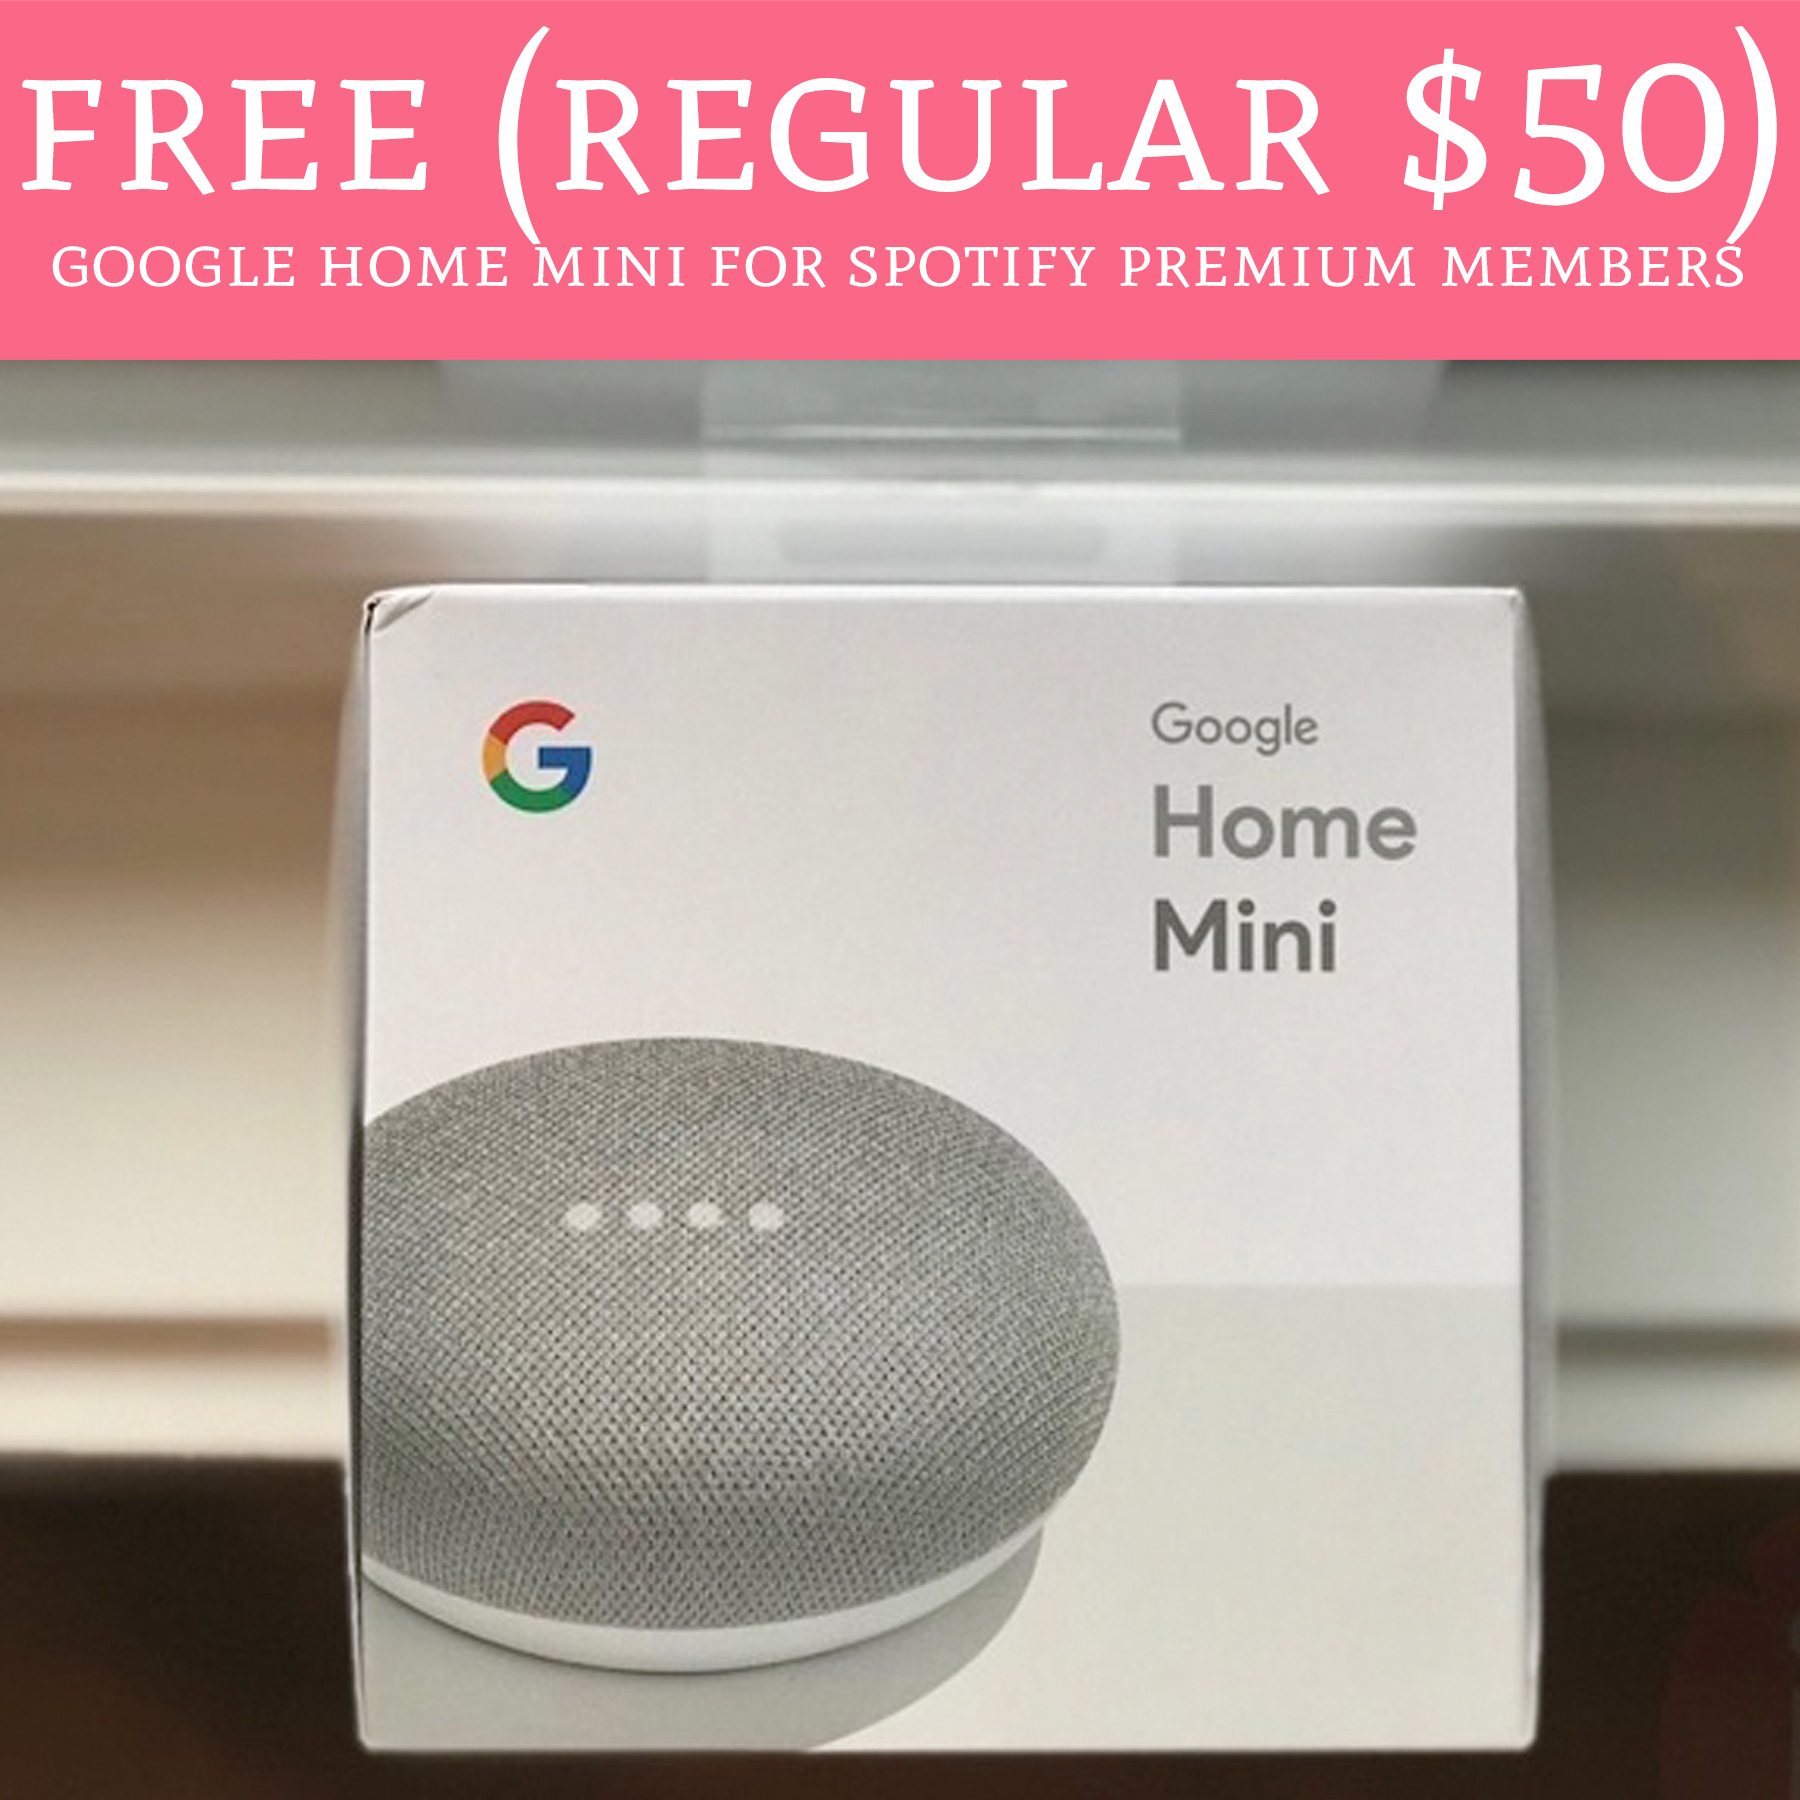 Can You Use Free Spotify With Google Home Mini